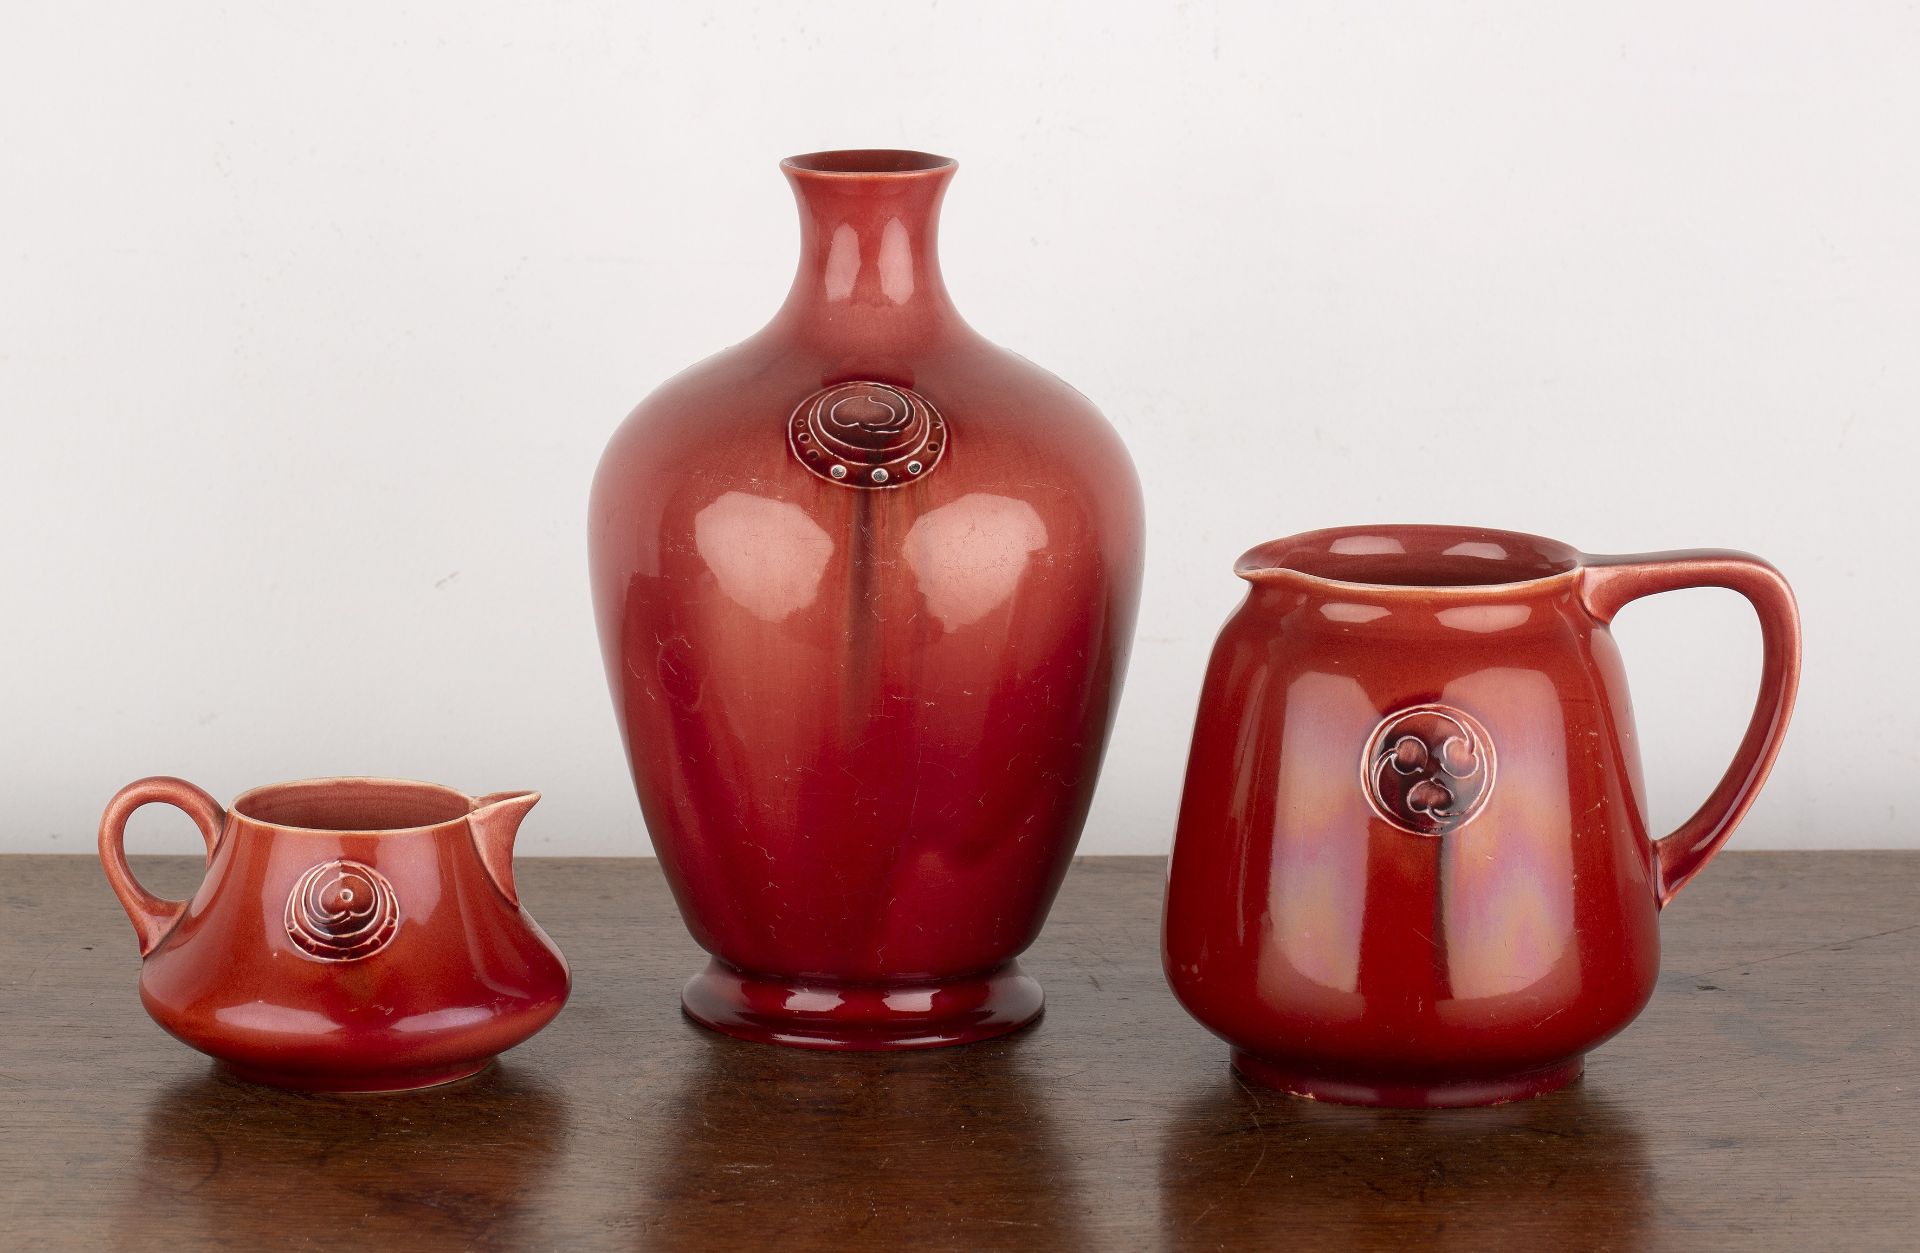 William Moorcroft (1872-1945) for Liberty and Co 'Flamminian ware' in red colourway, with foliate - Image 2 of 5